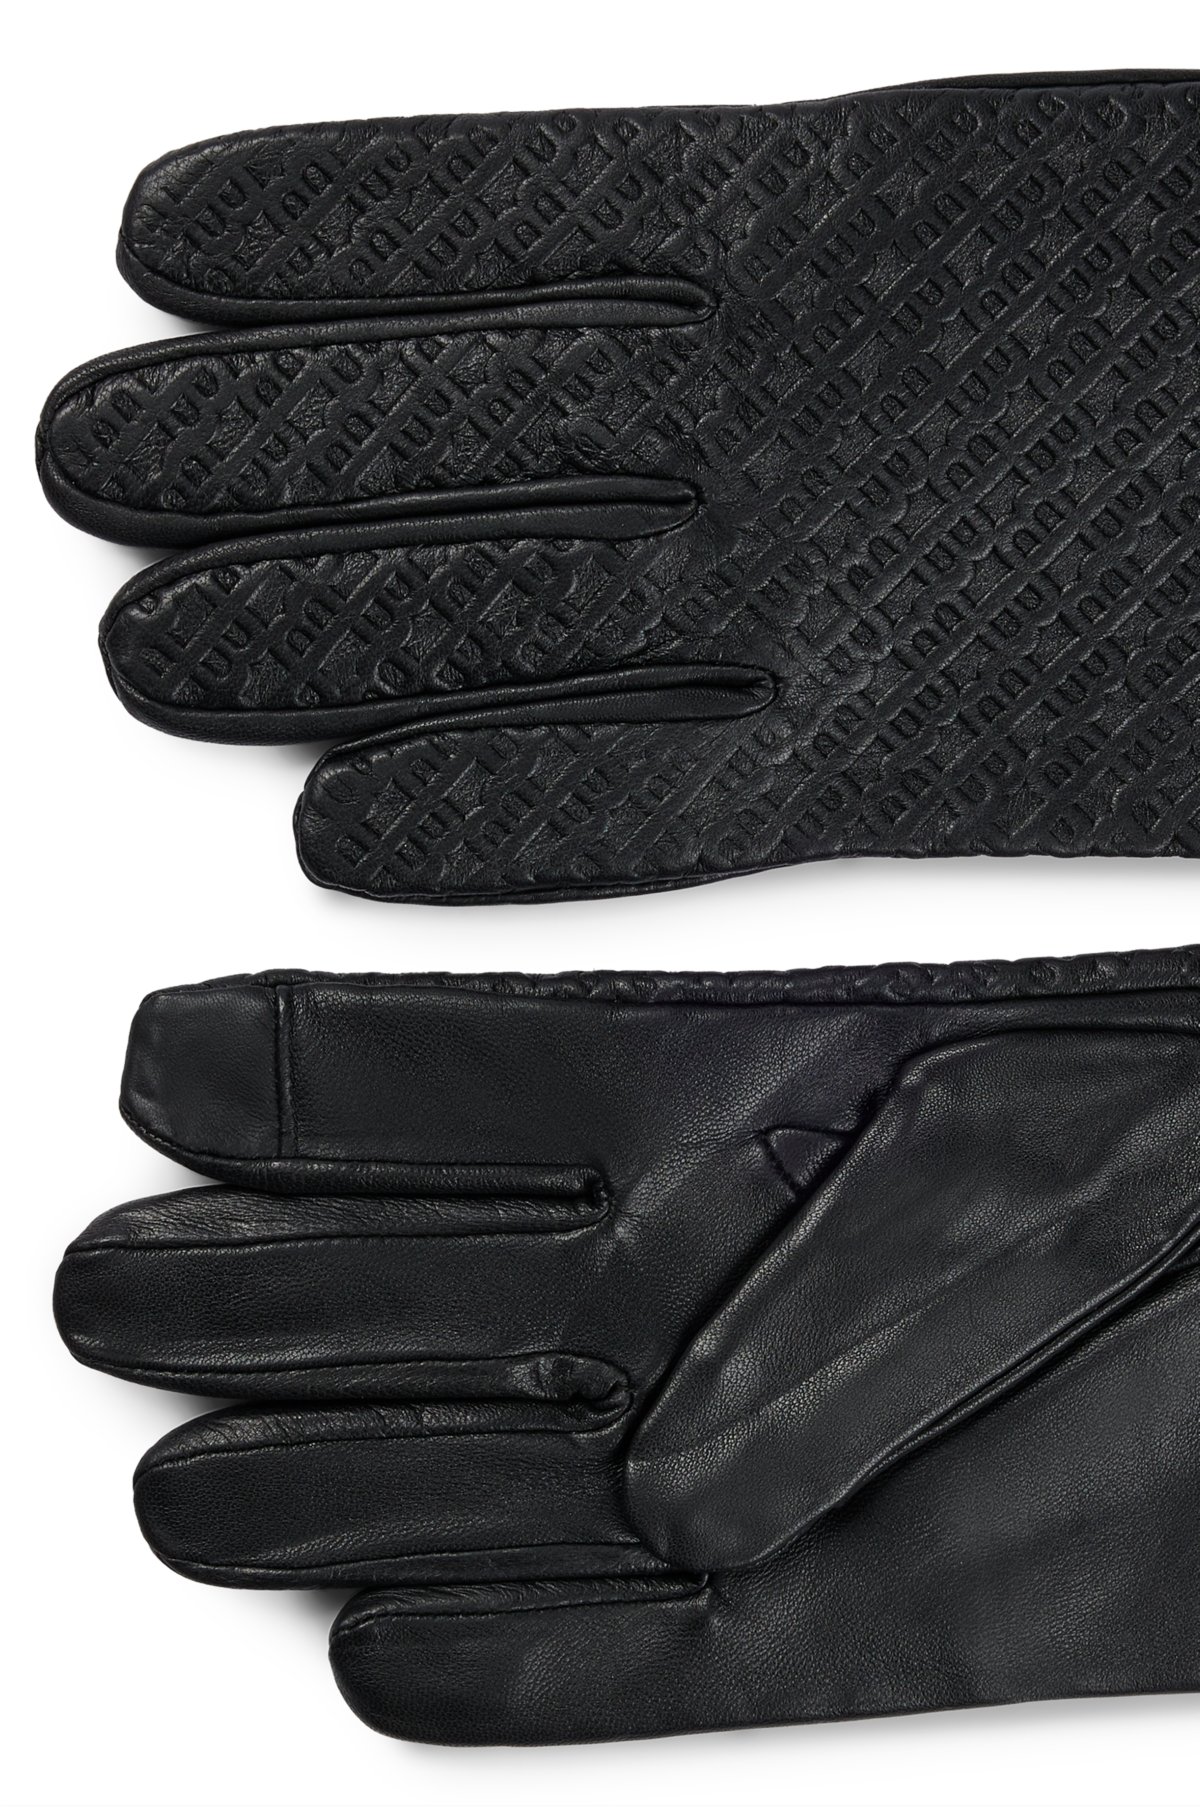 gloves - leather with touchscreen-friendly in fingertips BOSS Monogrammed